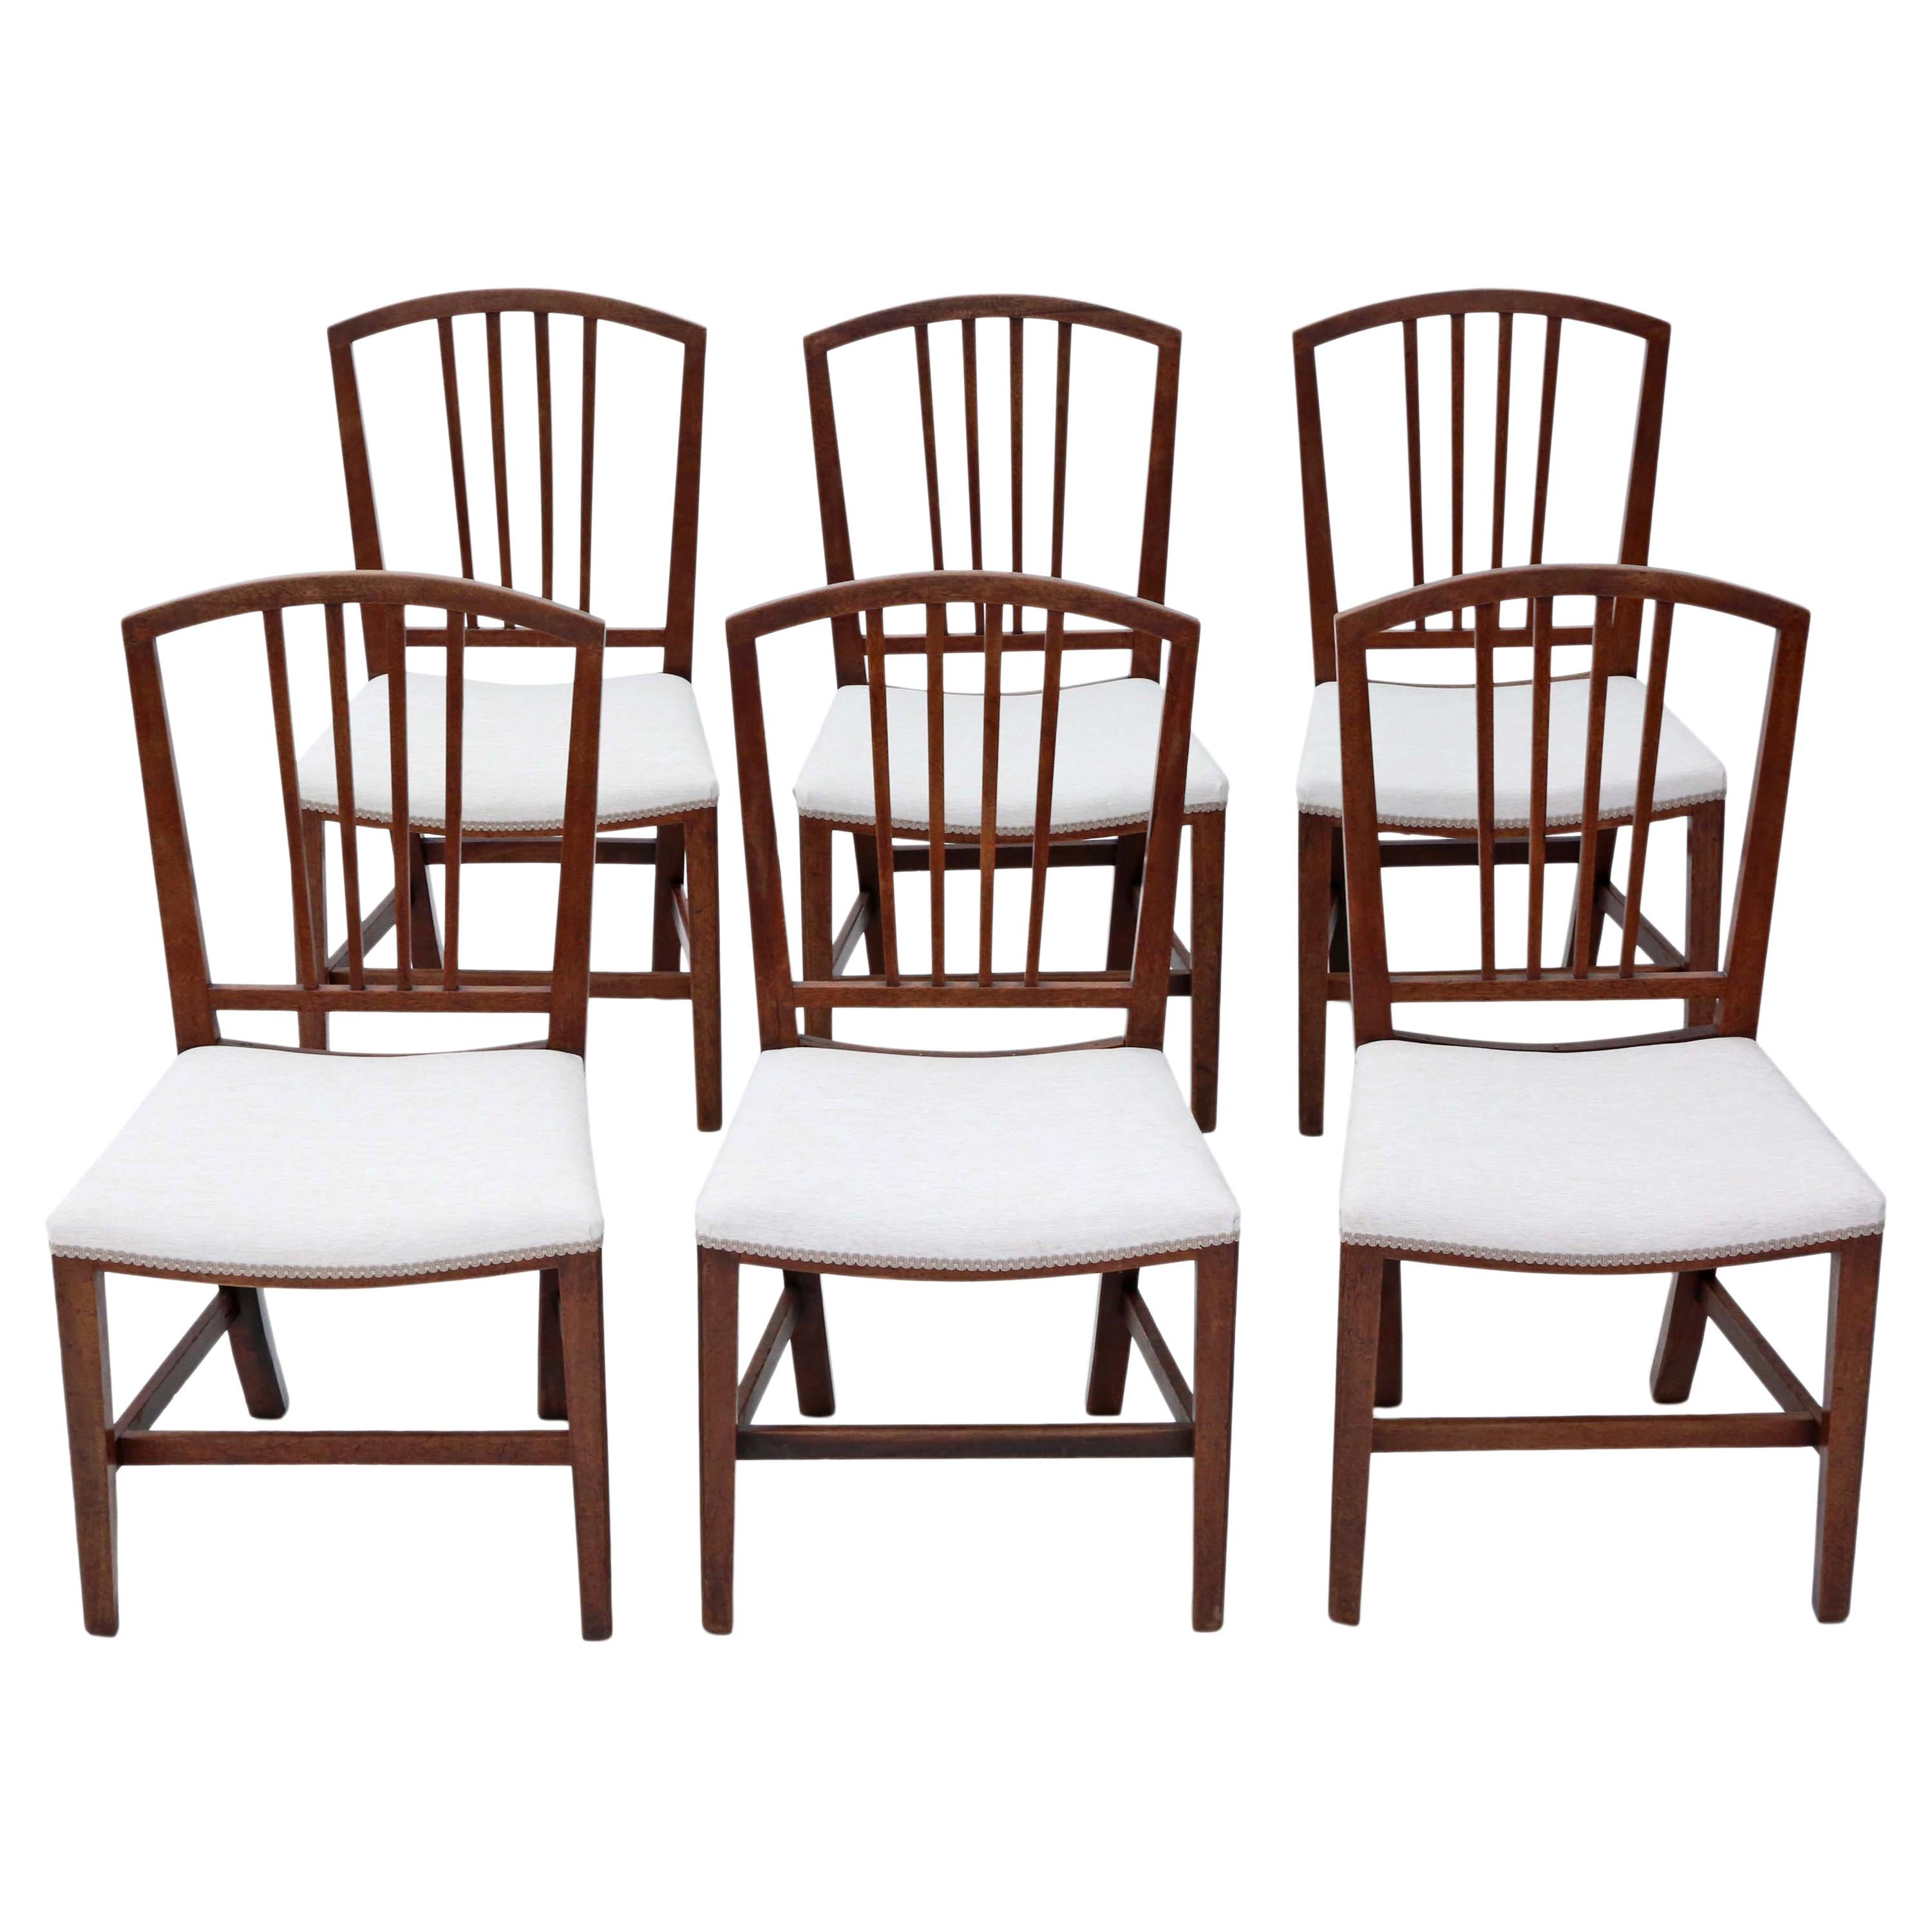 Set of 6 Victorian Mahogany Dining Chairs, 19th Century